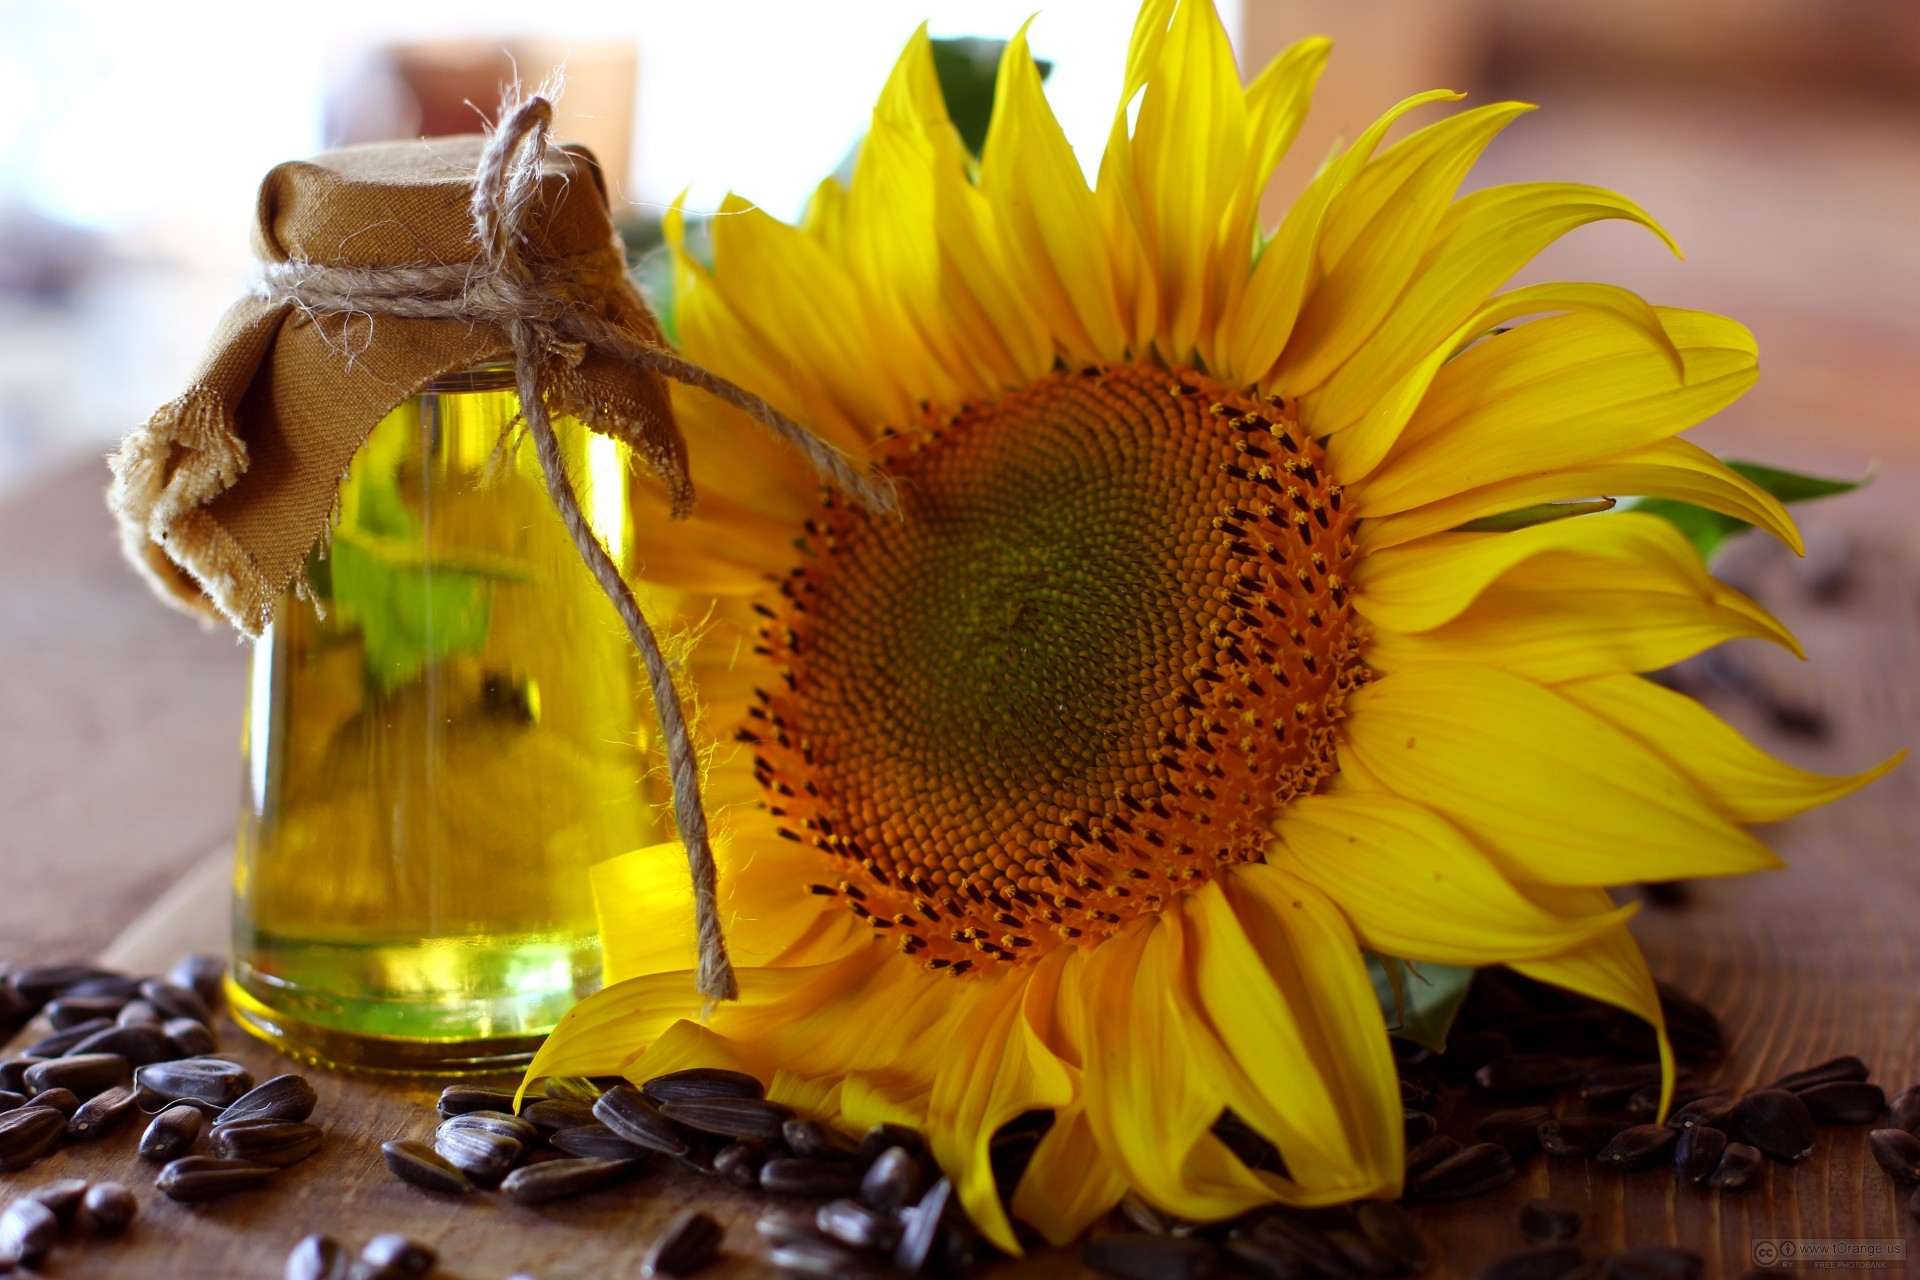 India will import another 200,000 tons of sunflower oil by the end of March